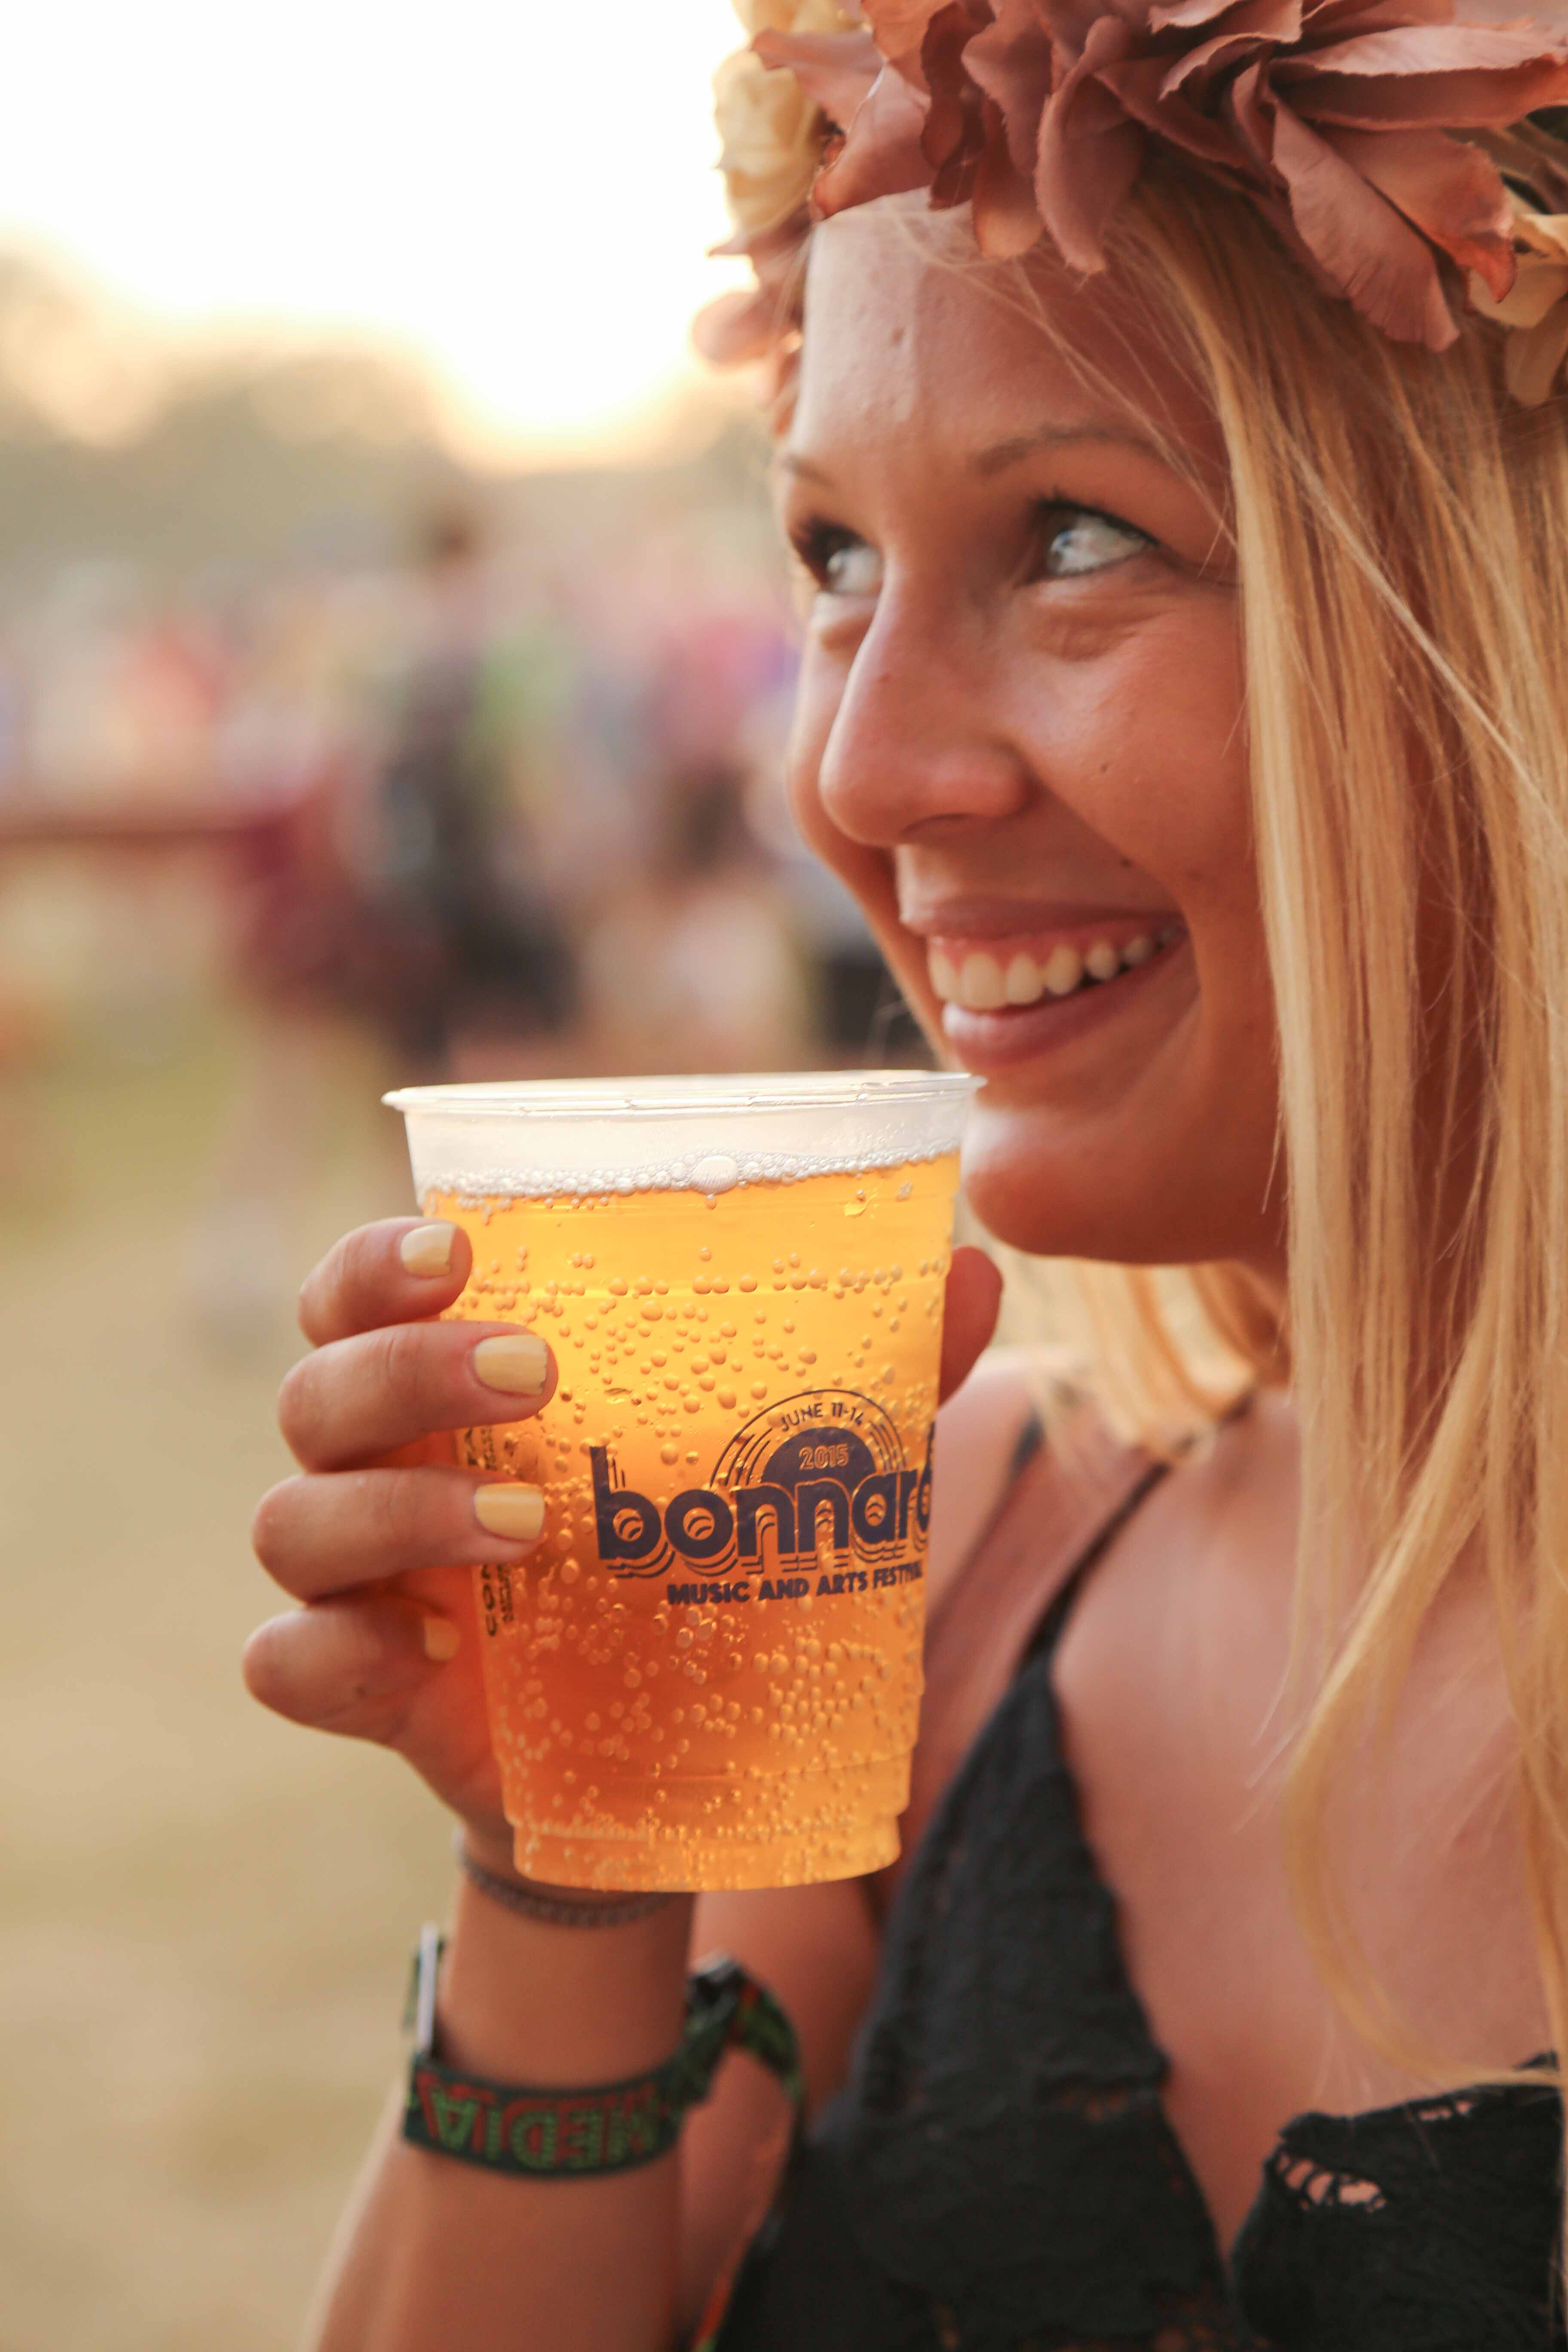 The Best of Bonnaroo 2015